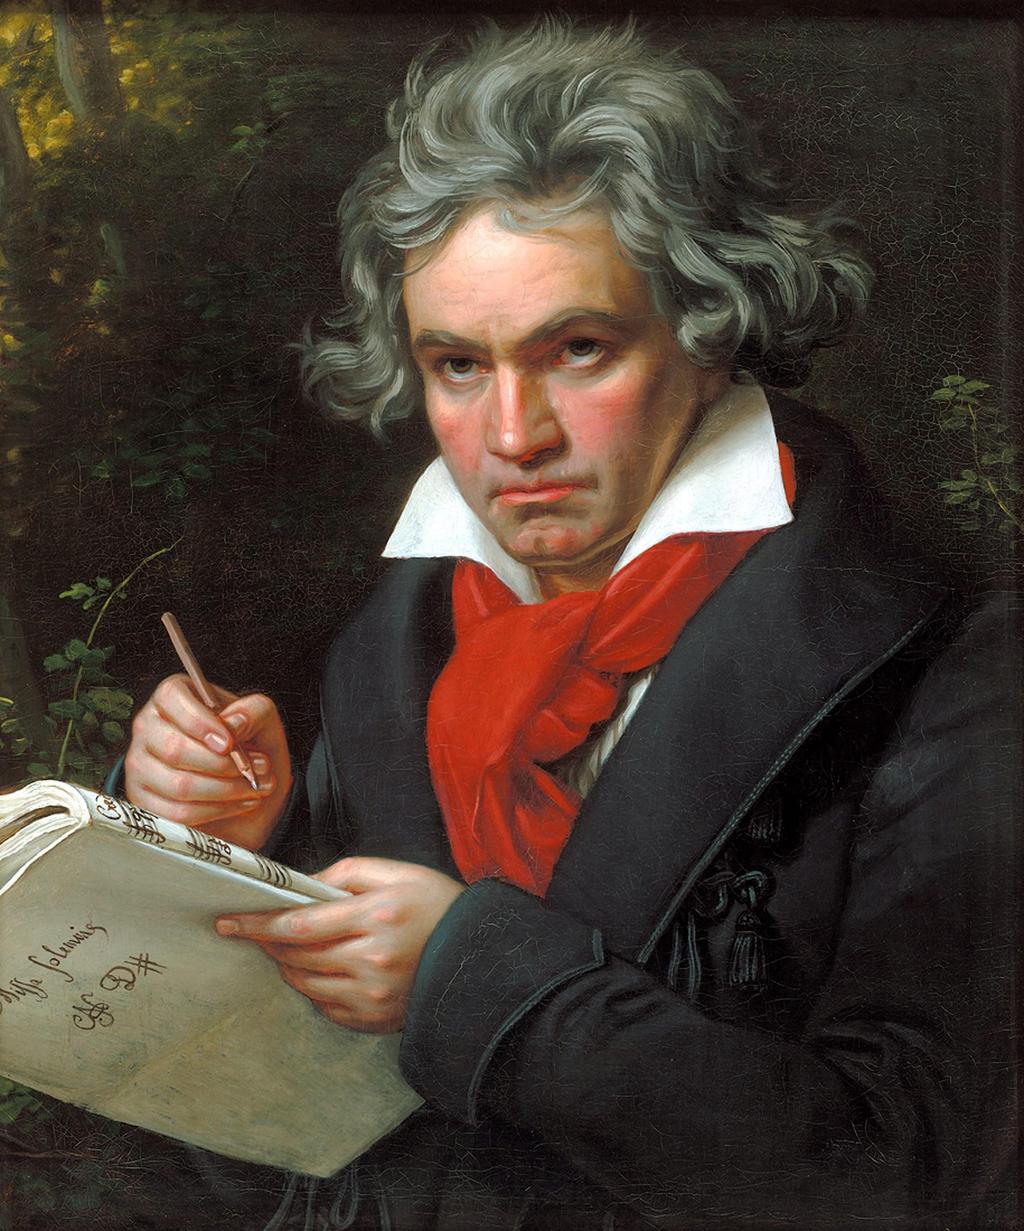 18.2 Ludwig van Beethoven Born: December 17, 1770 Died: March 26, 1827 Early music training was from mediocre teachers. Turning point in 1786 when the 18 year old Beethoven visited Vienna.